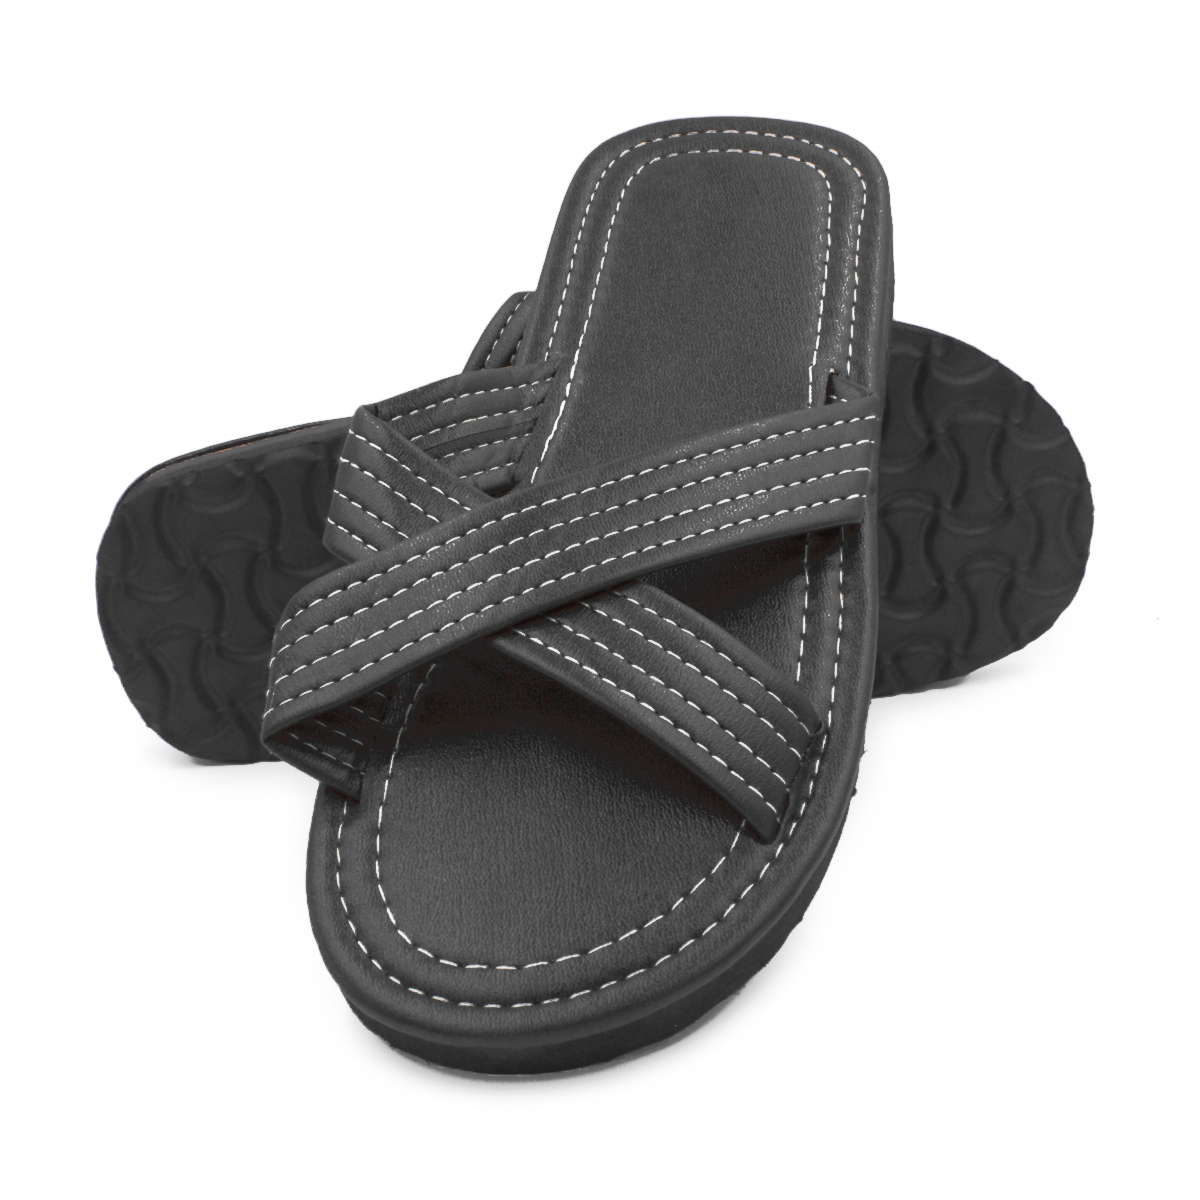 ZLF Mens Beach Slippers Cutting Genuine Leather Vamp Non-Slip Sandals Switch Backless Sandals Black 